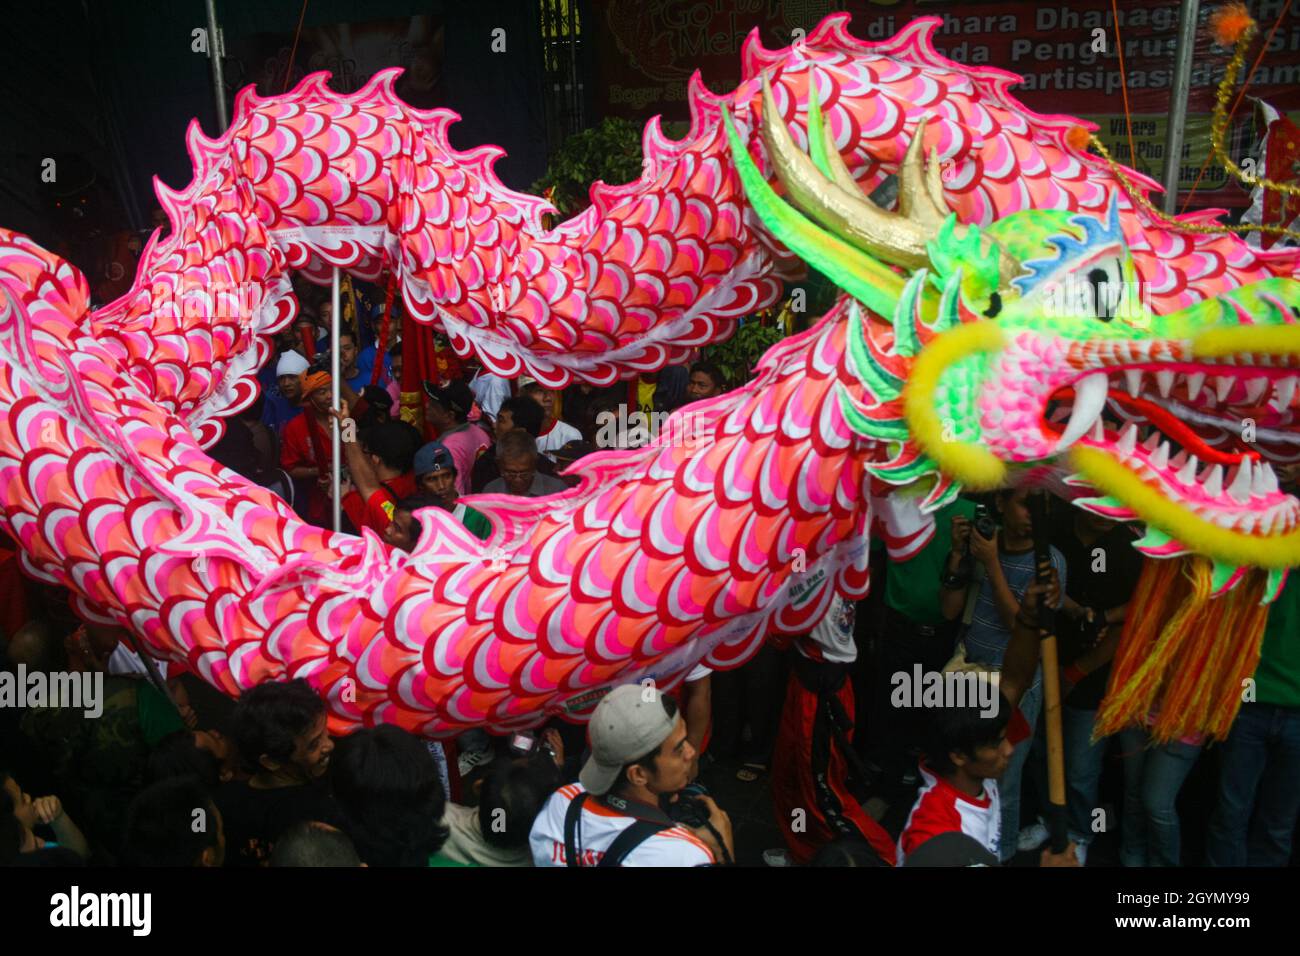 Liong or dragon was paraded during the Cap Go Meh celebration in the city of Bogor. Cap Go Meh is the closing day of a series of Chinese New Year. Stock Photo